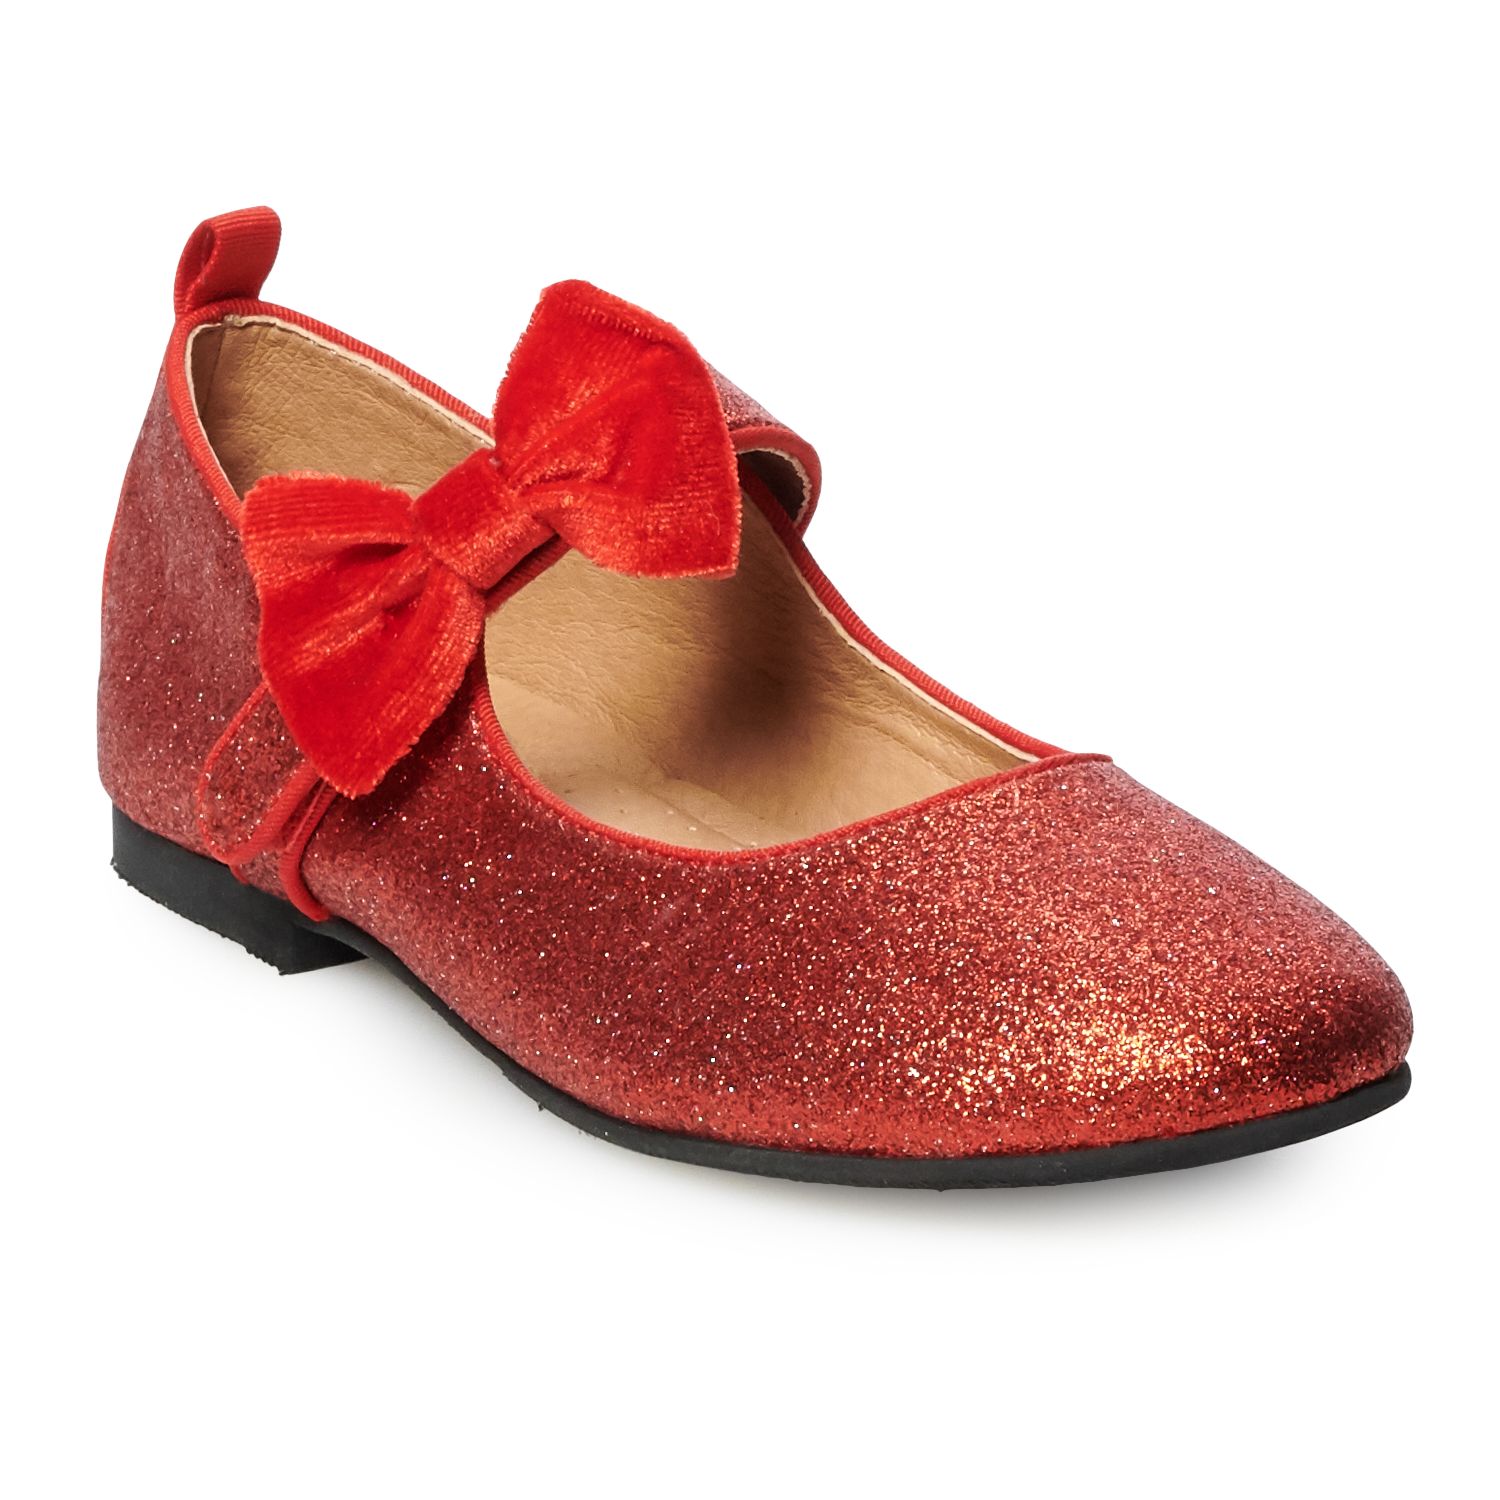 girls red dress shoes